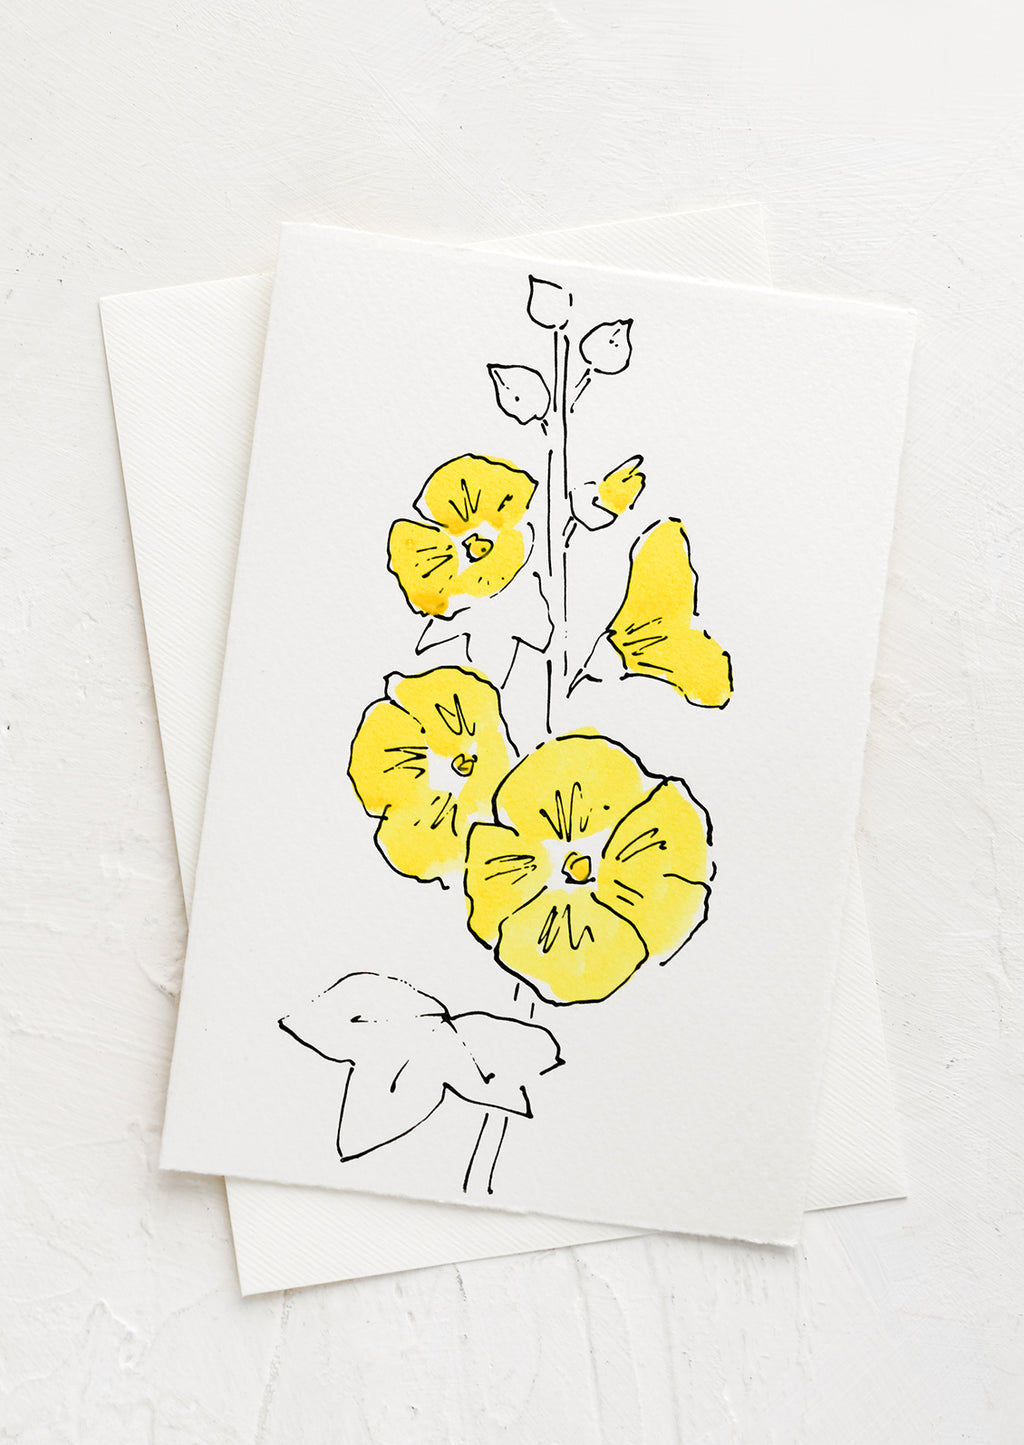 Hollyhock: A white greeting card with a hand painted illustration of a hollyhock flower.